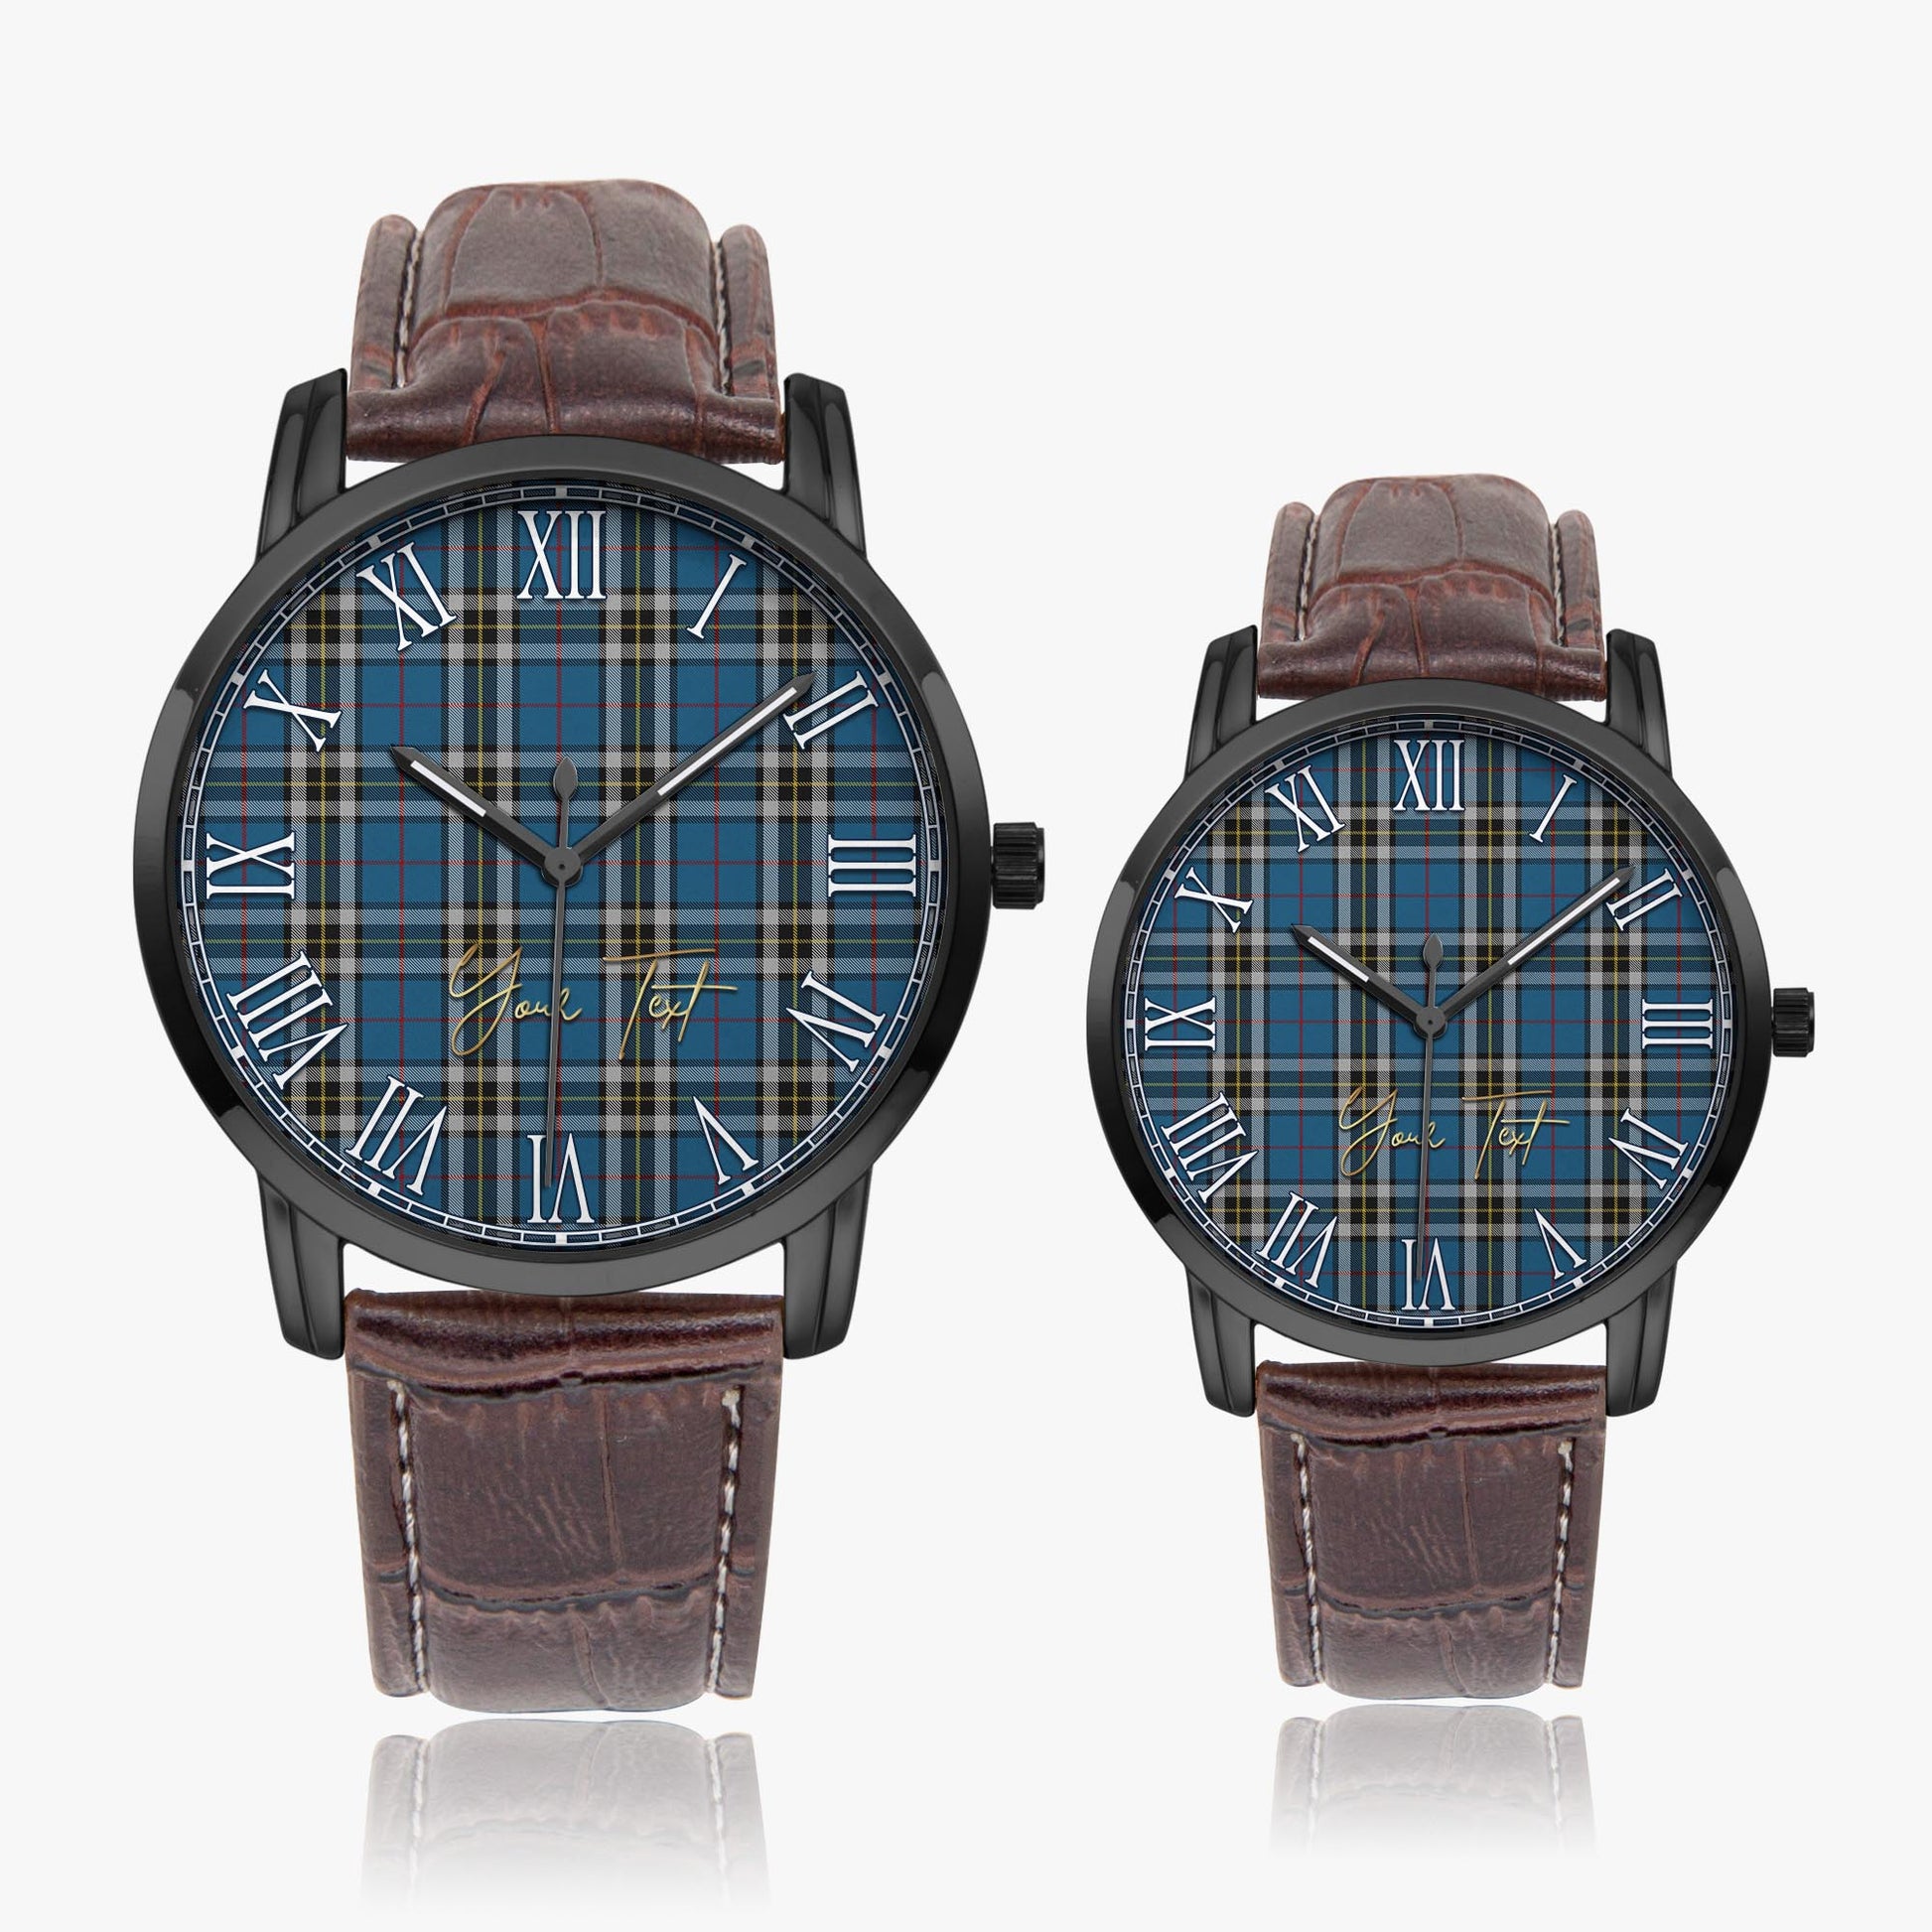 Thomson Dress Blue Tartan Personalized Your Text Leather Trap Quartz Watch Wide Type Black Case With Brown Leather Strap - Tartanvibesclothing Shop